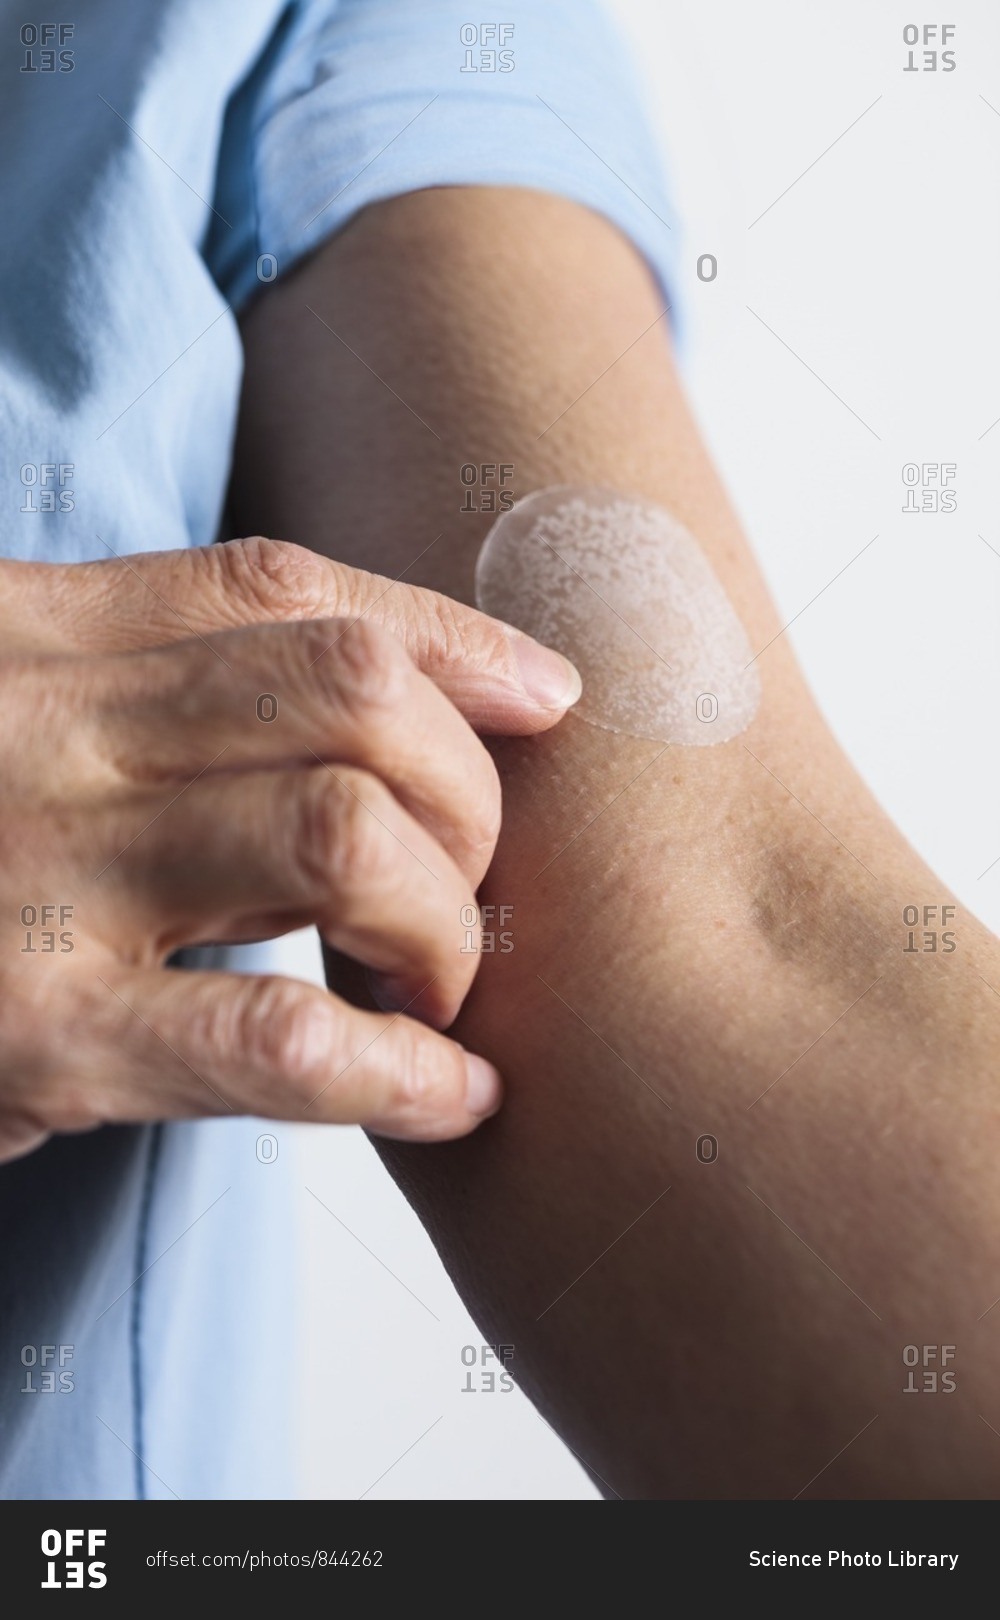 Woman applying a hormone replacement therapy (HRT) patch to her arm.